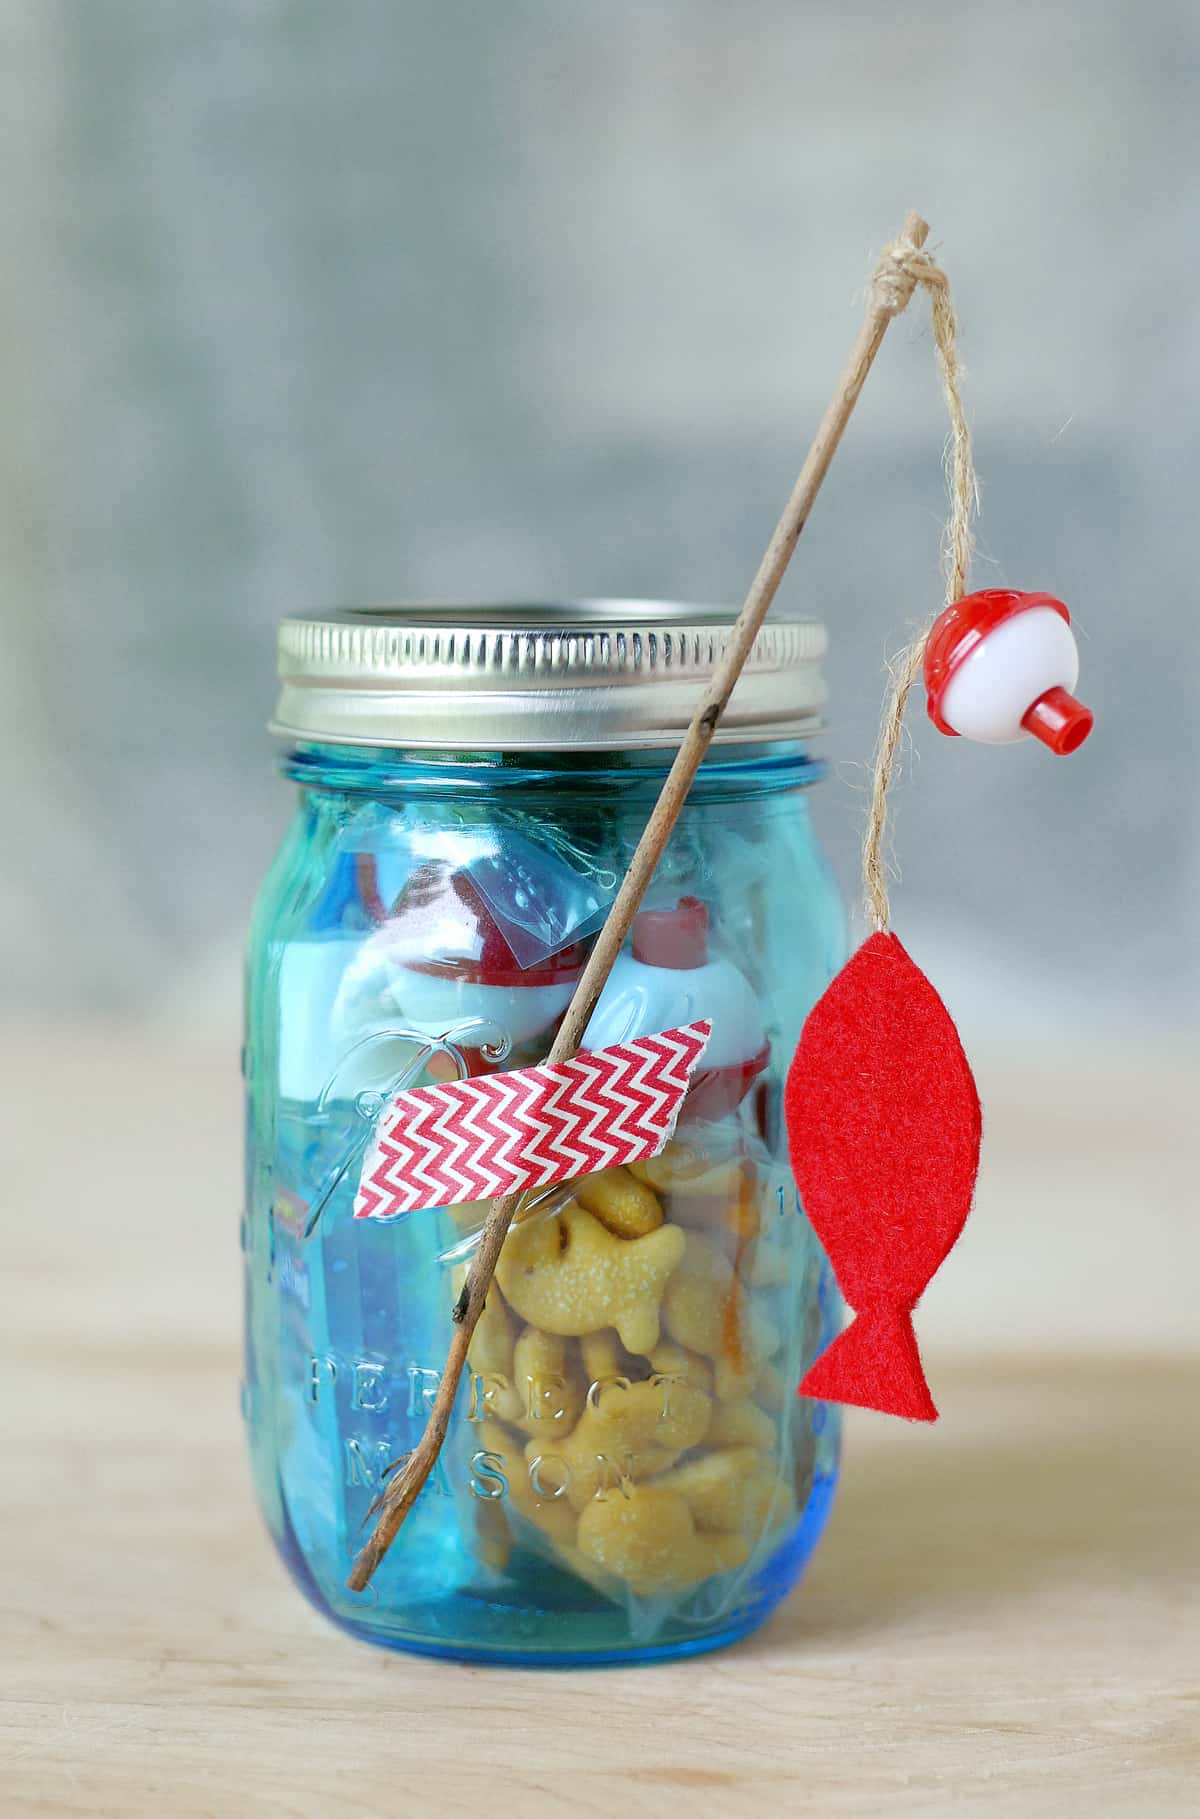 Help me build fishing themed sensory jar party favors for my son's fir